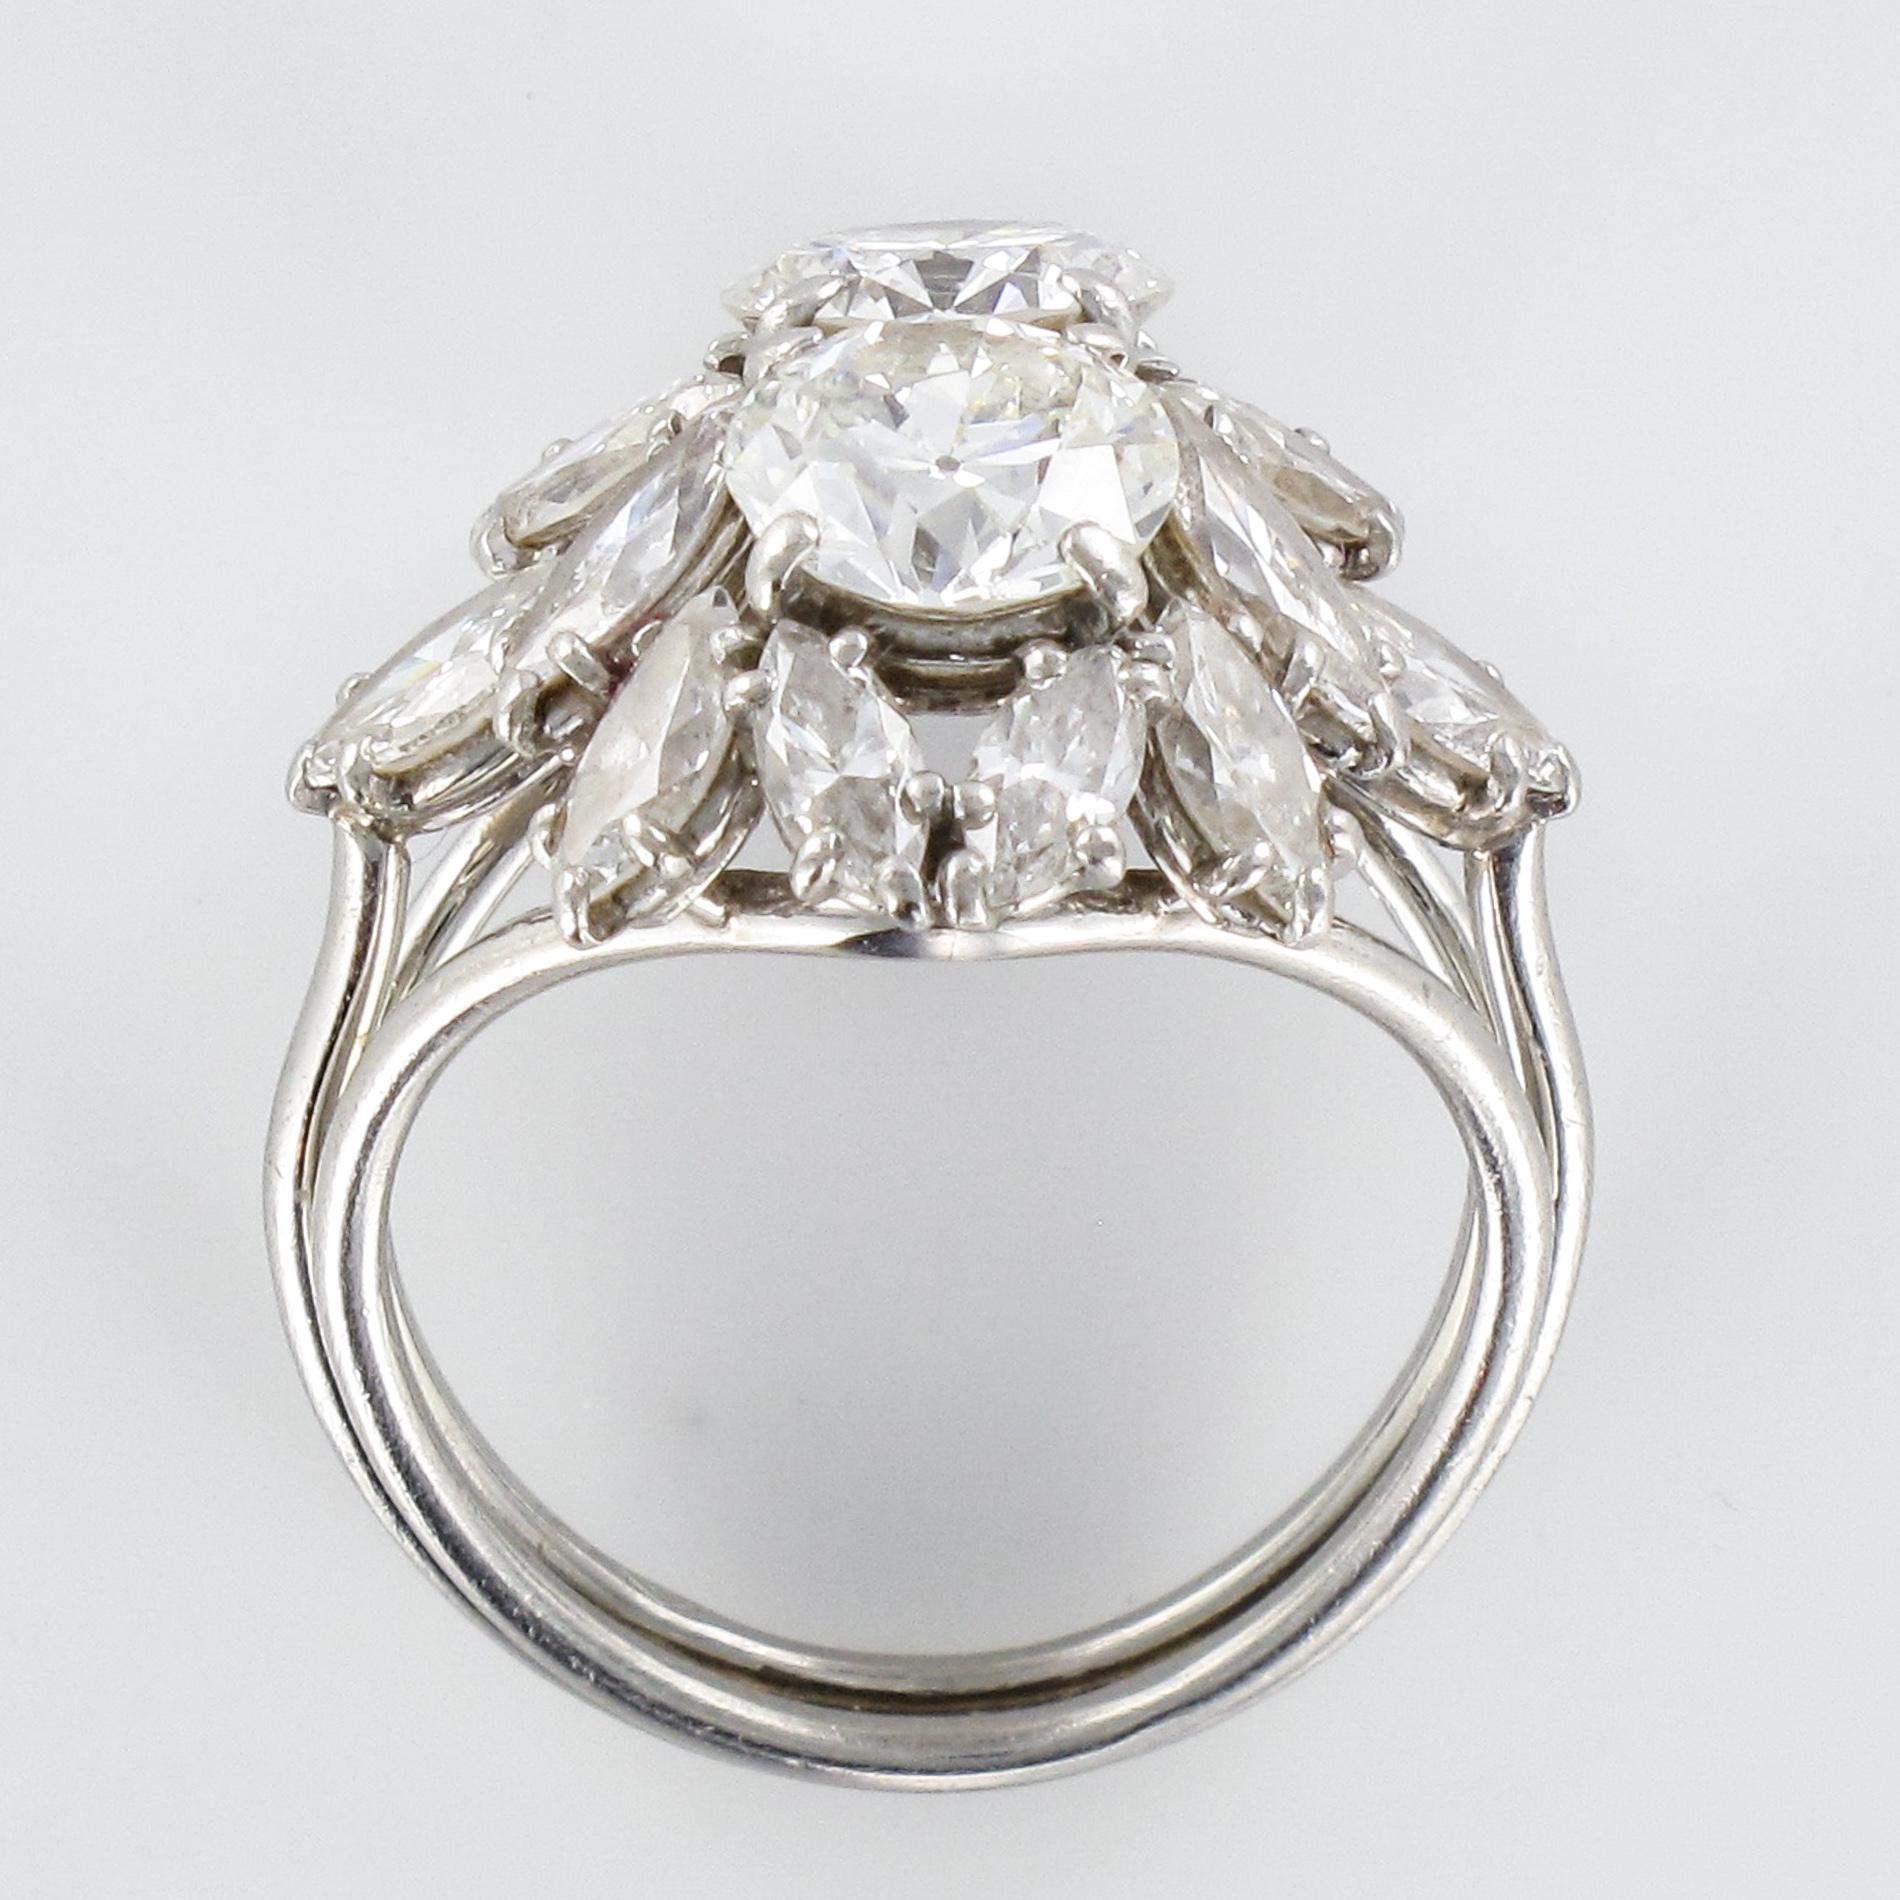 1950s French Cartier 7 Carat Diamond Platinum Ring For Sale 8